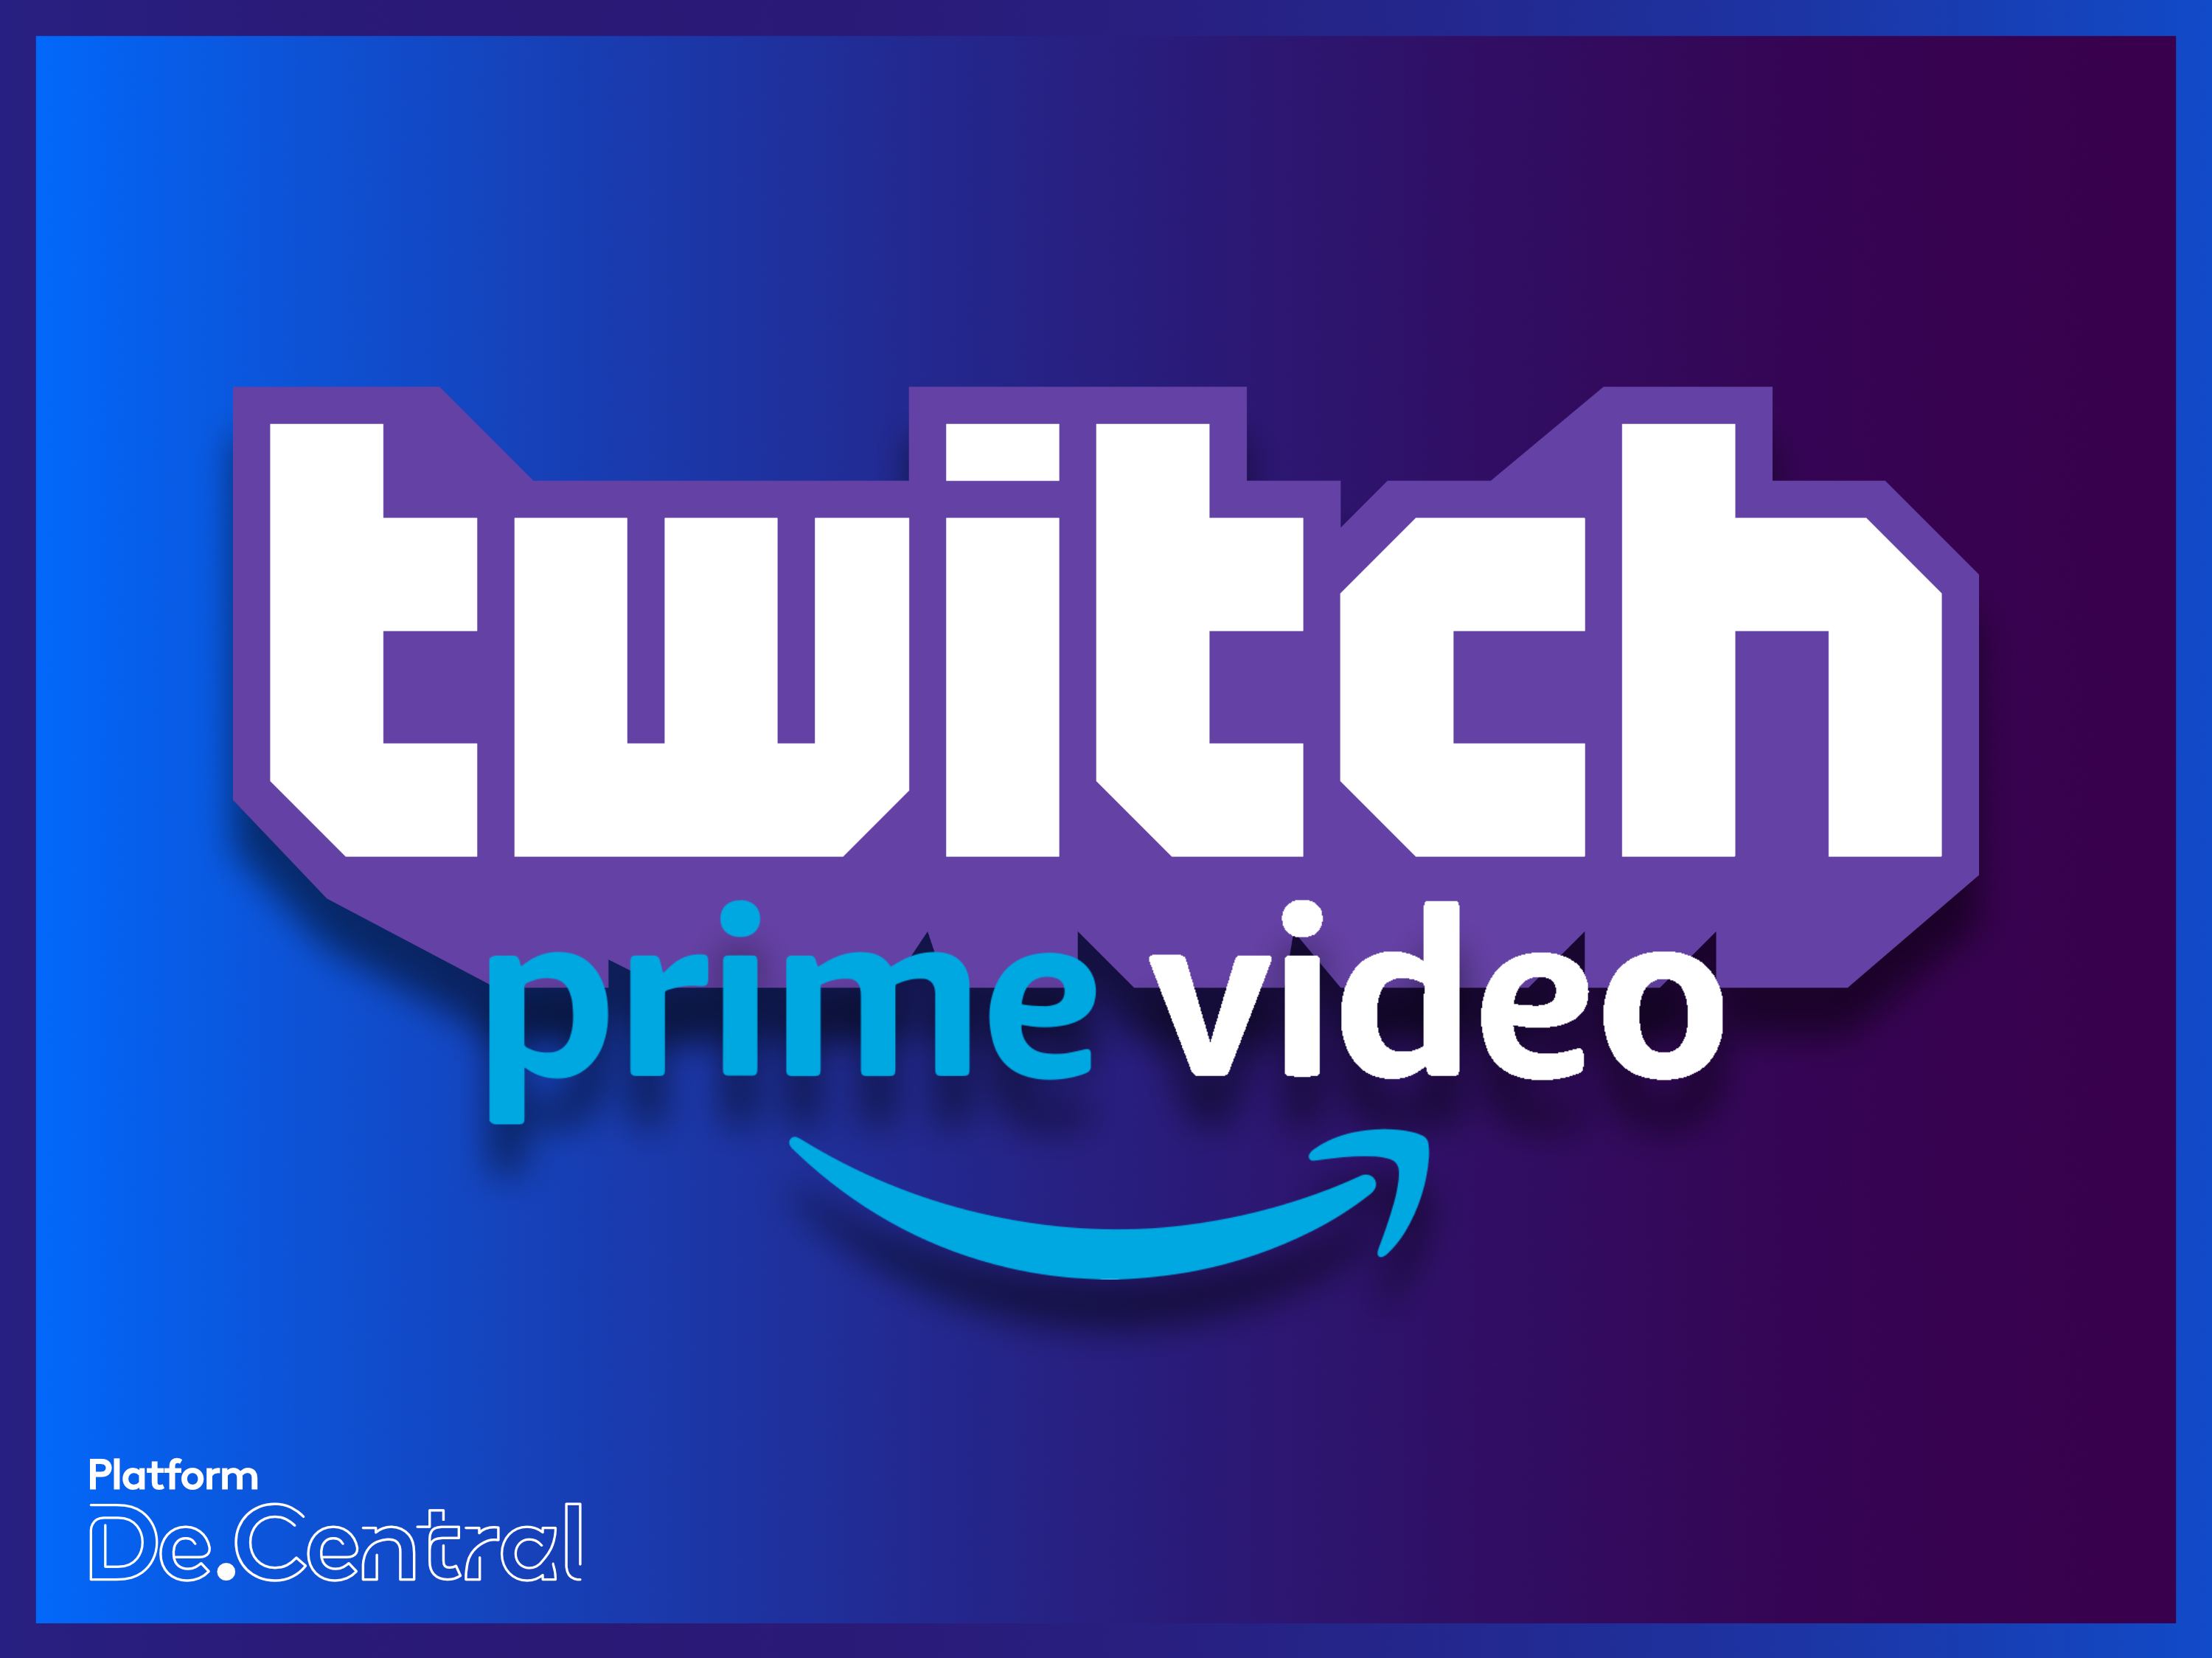 Twitch Prime Video Watch Parties expands